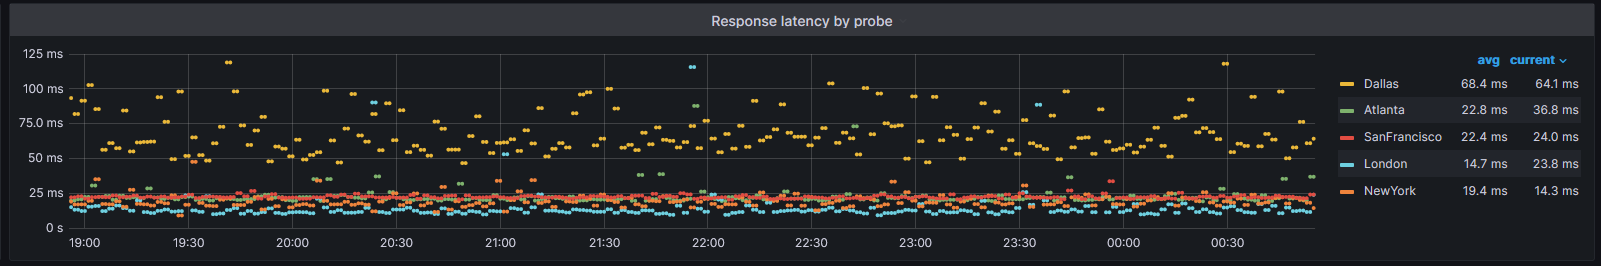 A graph of ping latency by geographic city